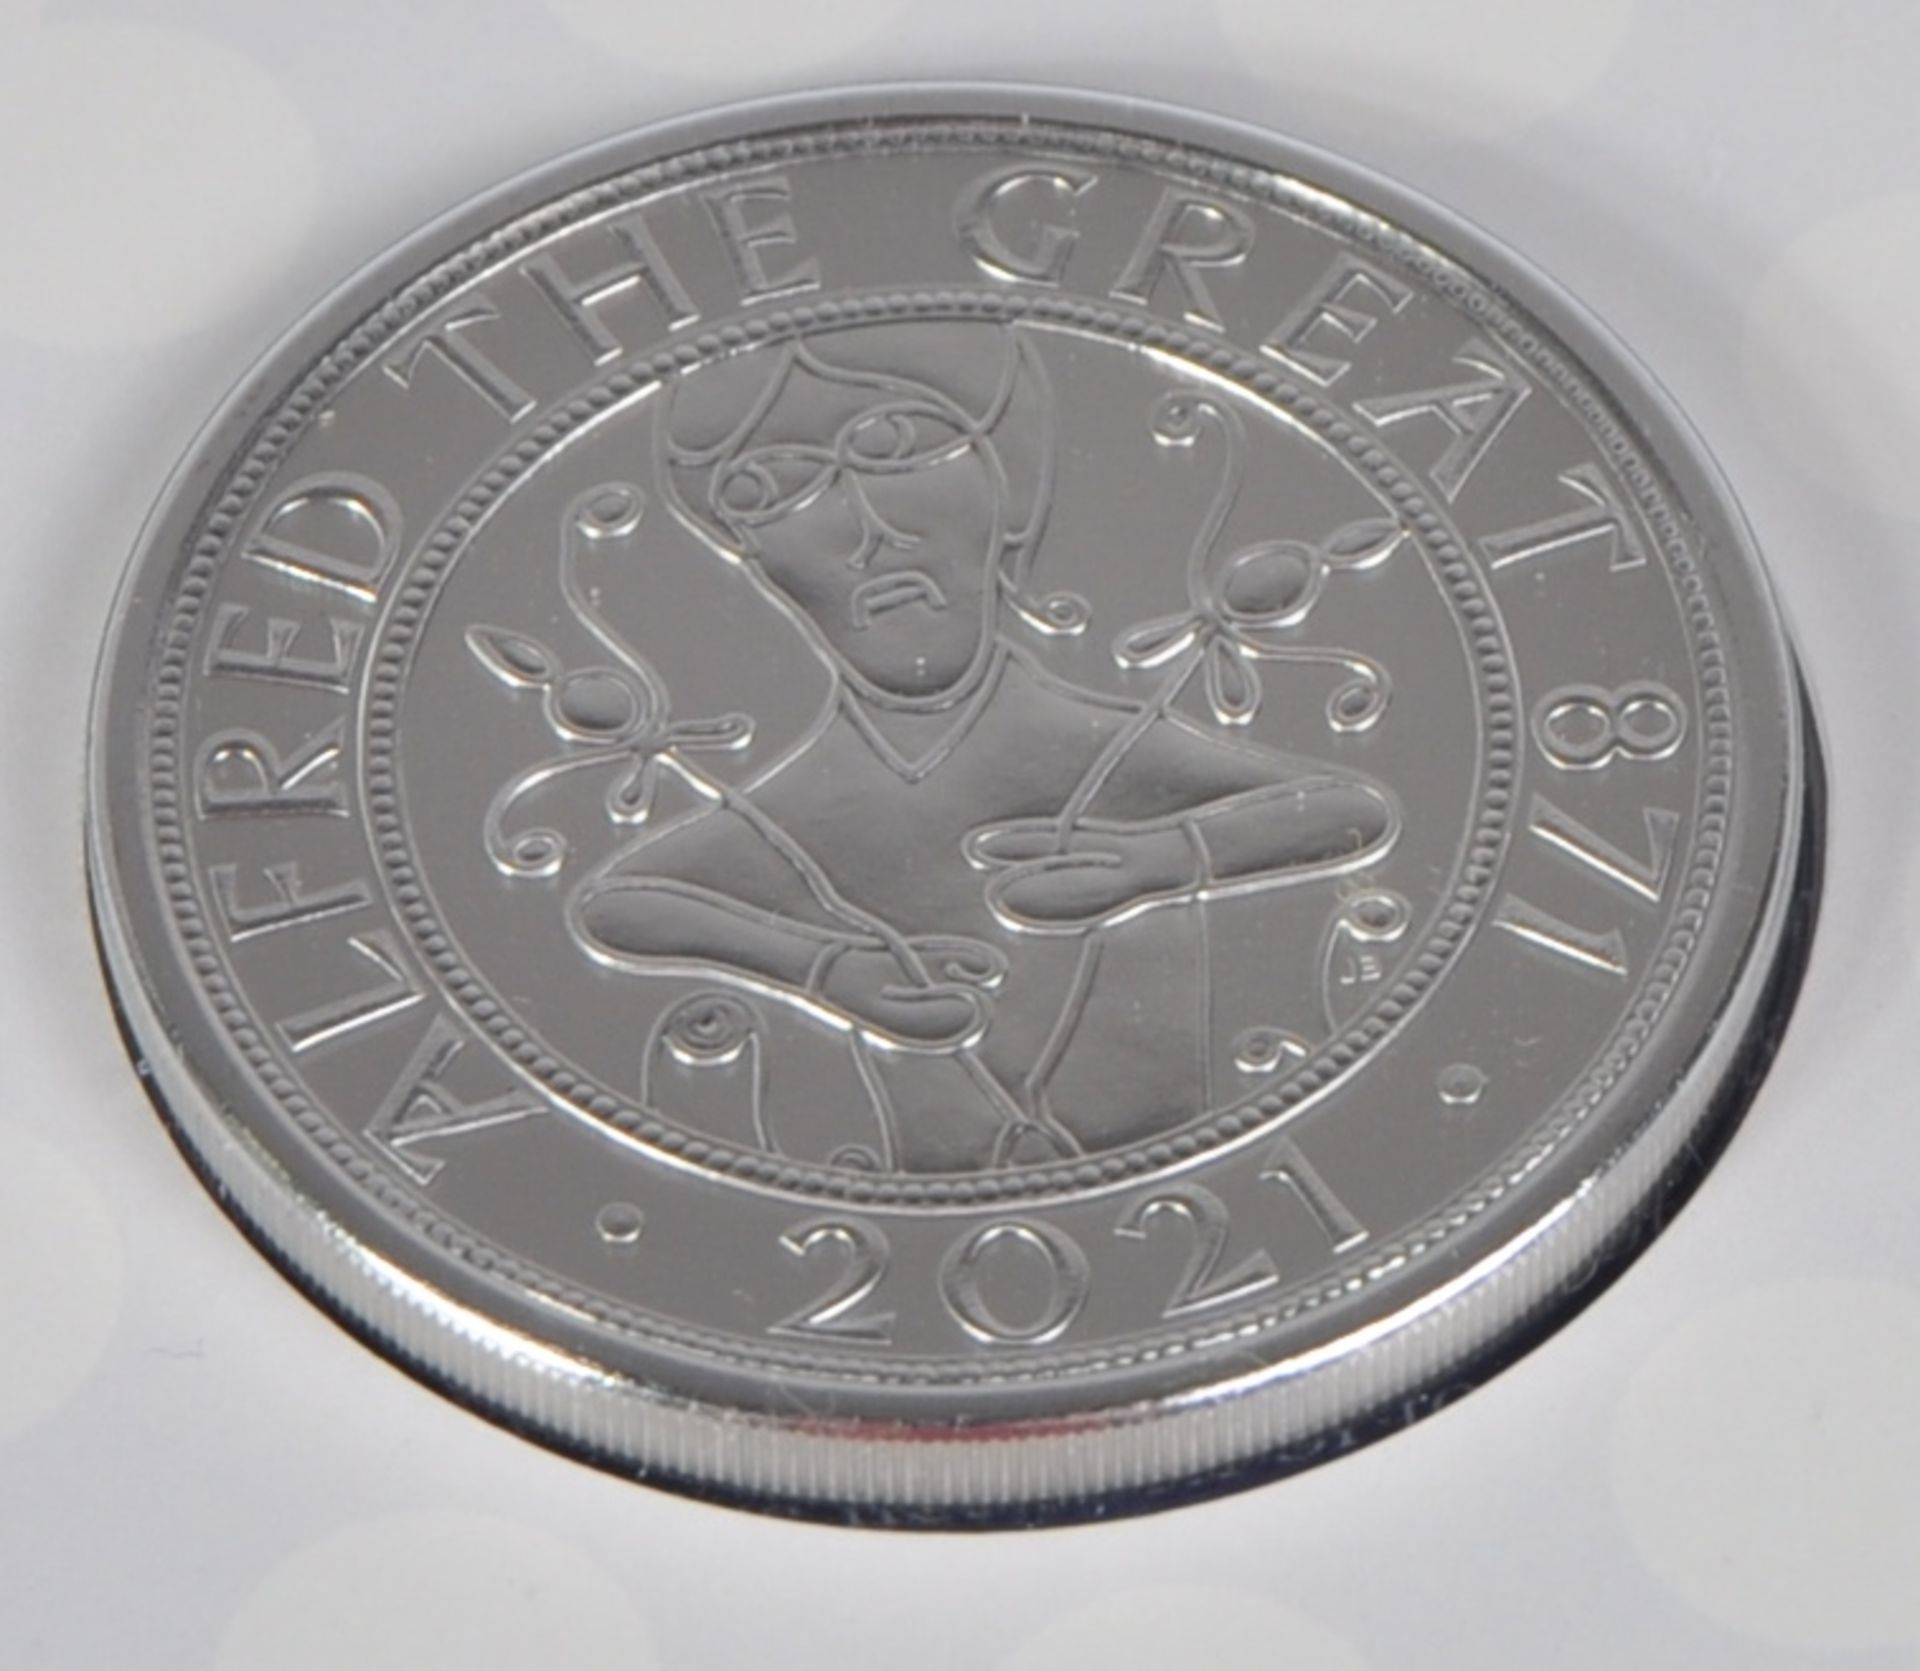 COINS - ROYAL MINT - COLLECTION OF £5 PRESENTATION COINS - Image 7 of 8